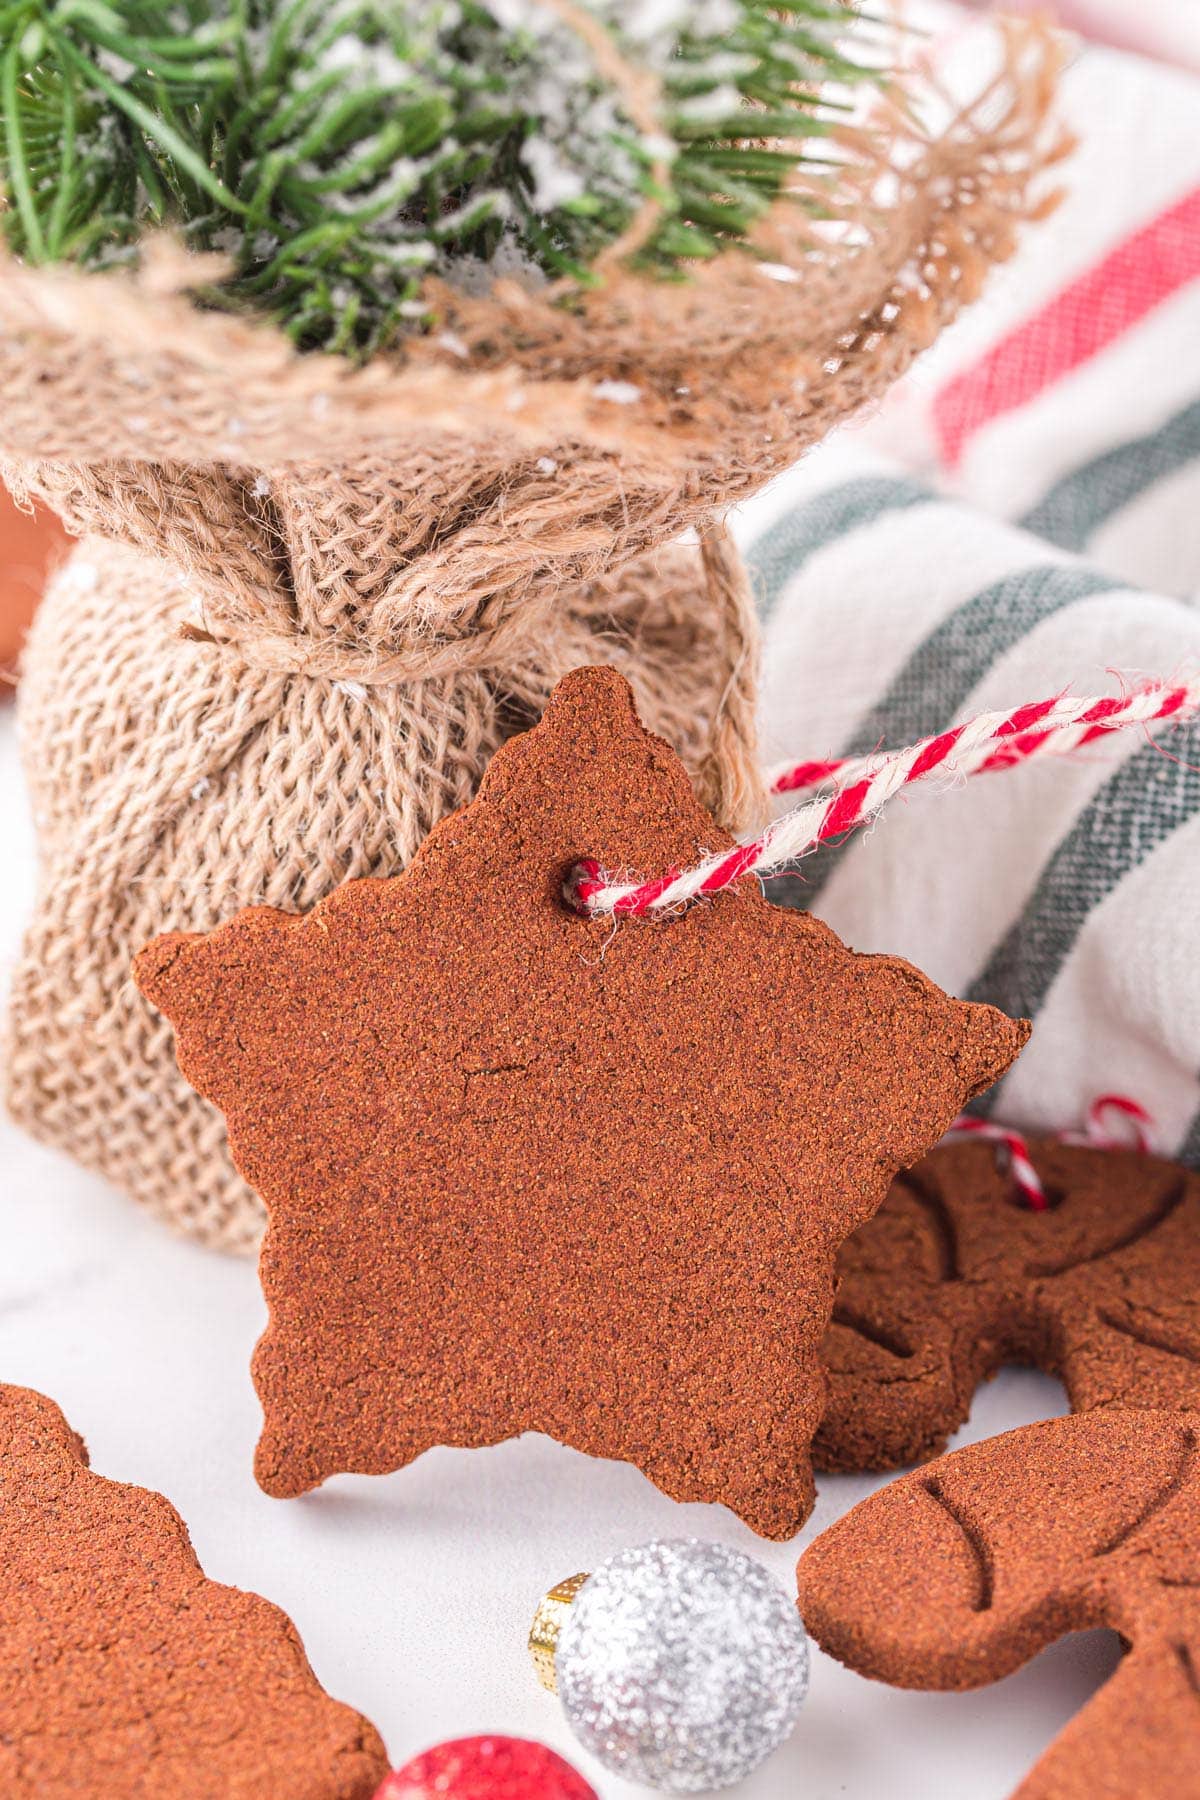 cinnamon Christmas ornaments in the shape of a star with a red and white string attached to it for hanging.